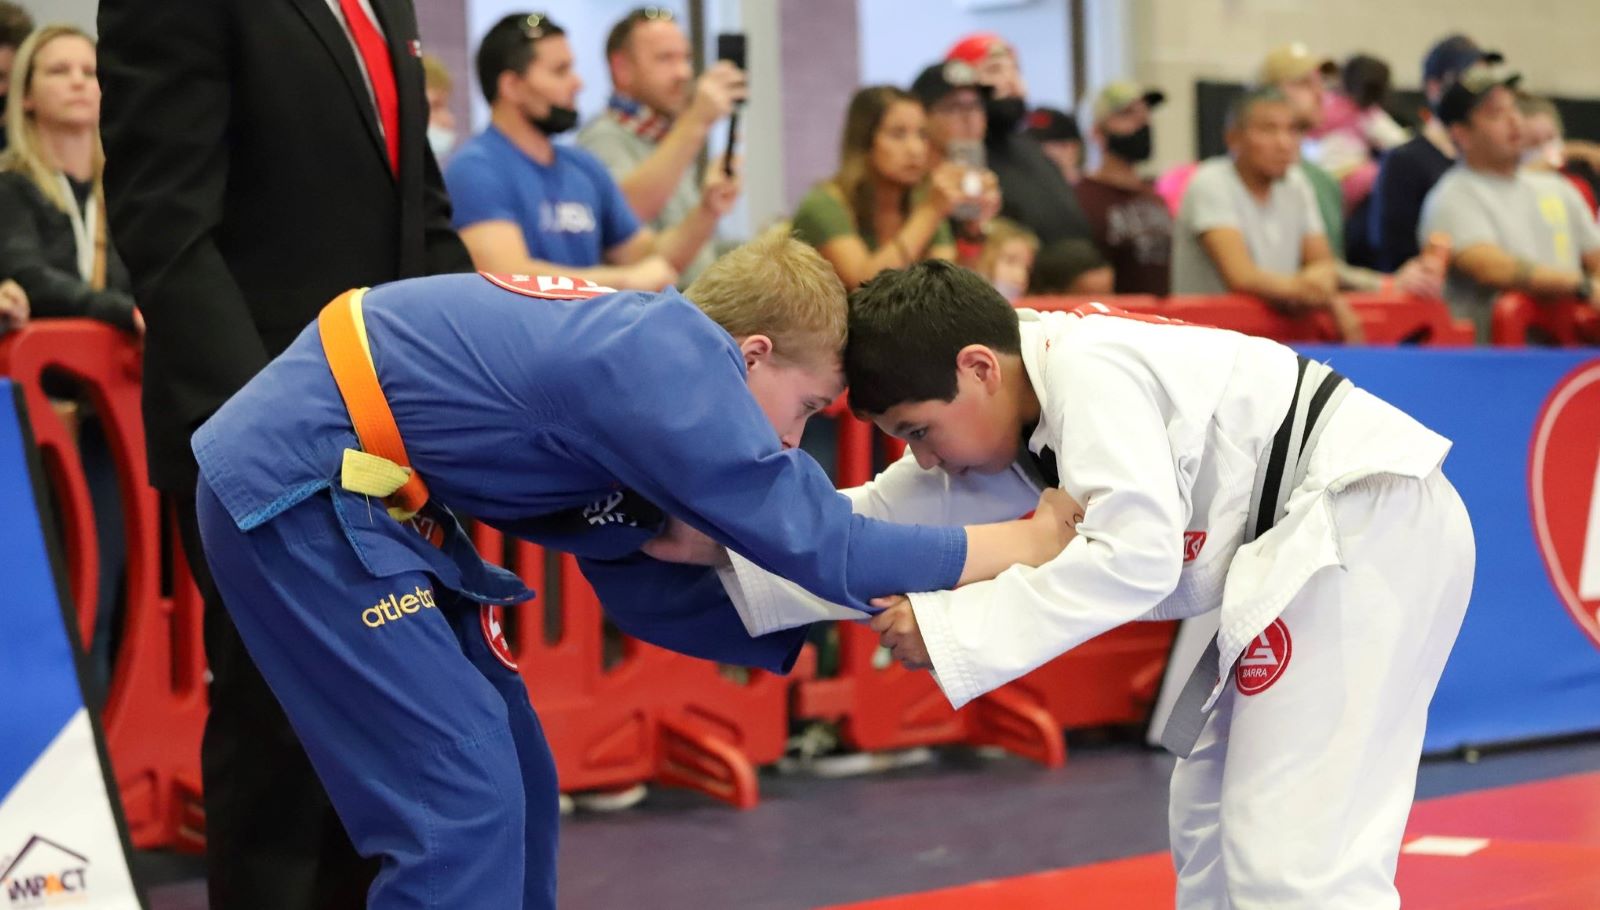 Martial Arts Training for Kids Near Me Washington | Washington Kids Martial Arts | Gracie Barra Washington